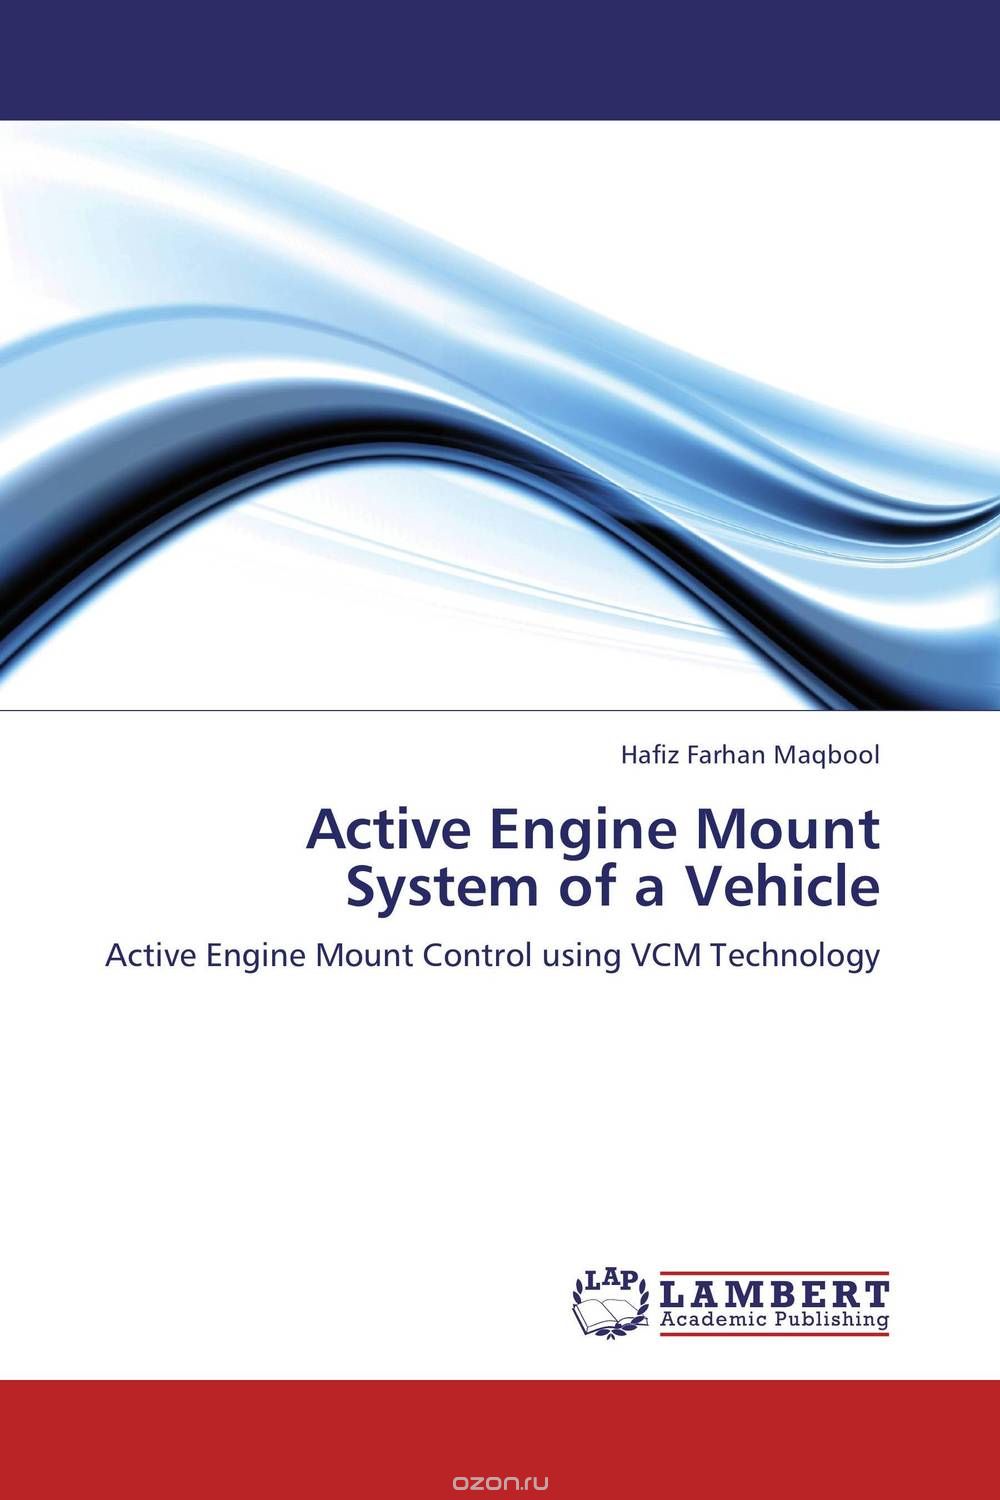 Active Engine Mount System of a Vehicle